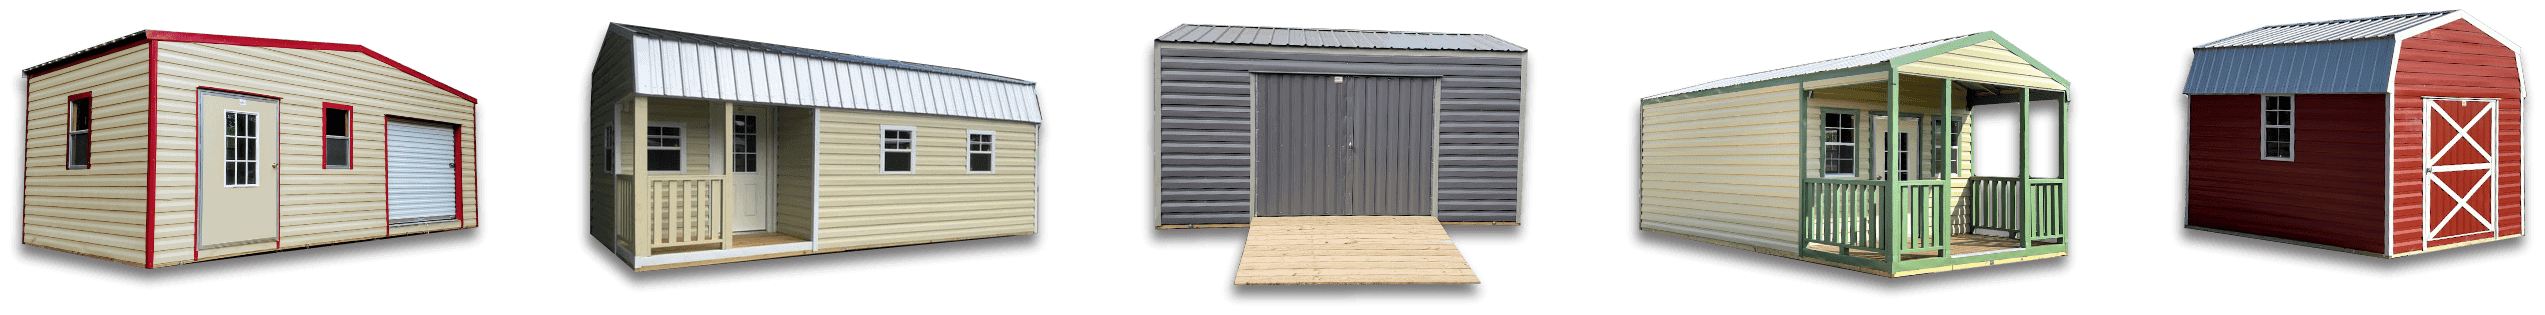 A row of five 12x16 Portable Storage Sheds manufactured by Robin Sheds. Each shed is made in the USA and features a sturdy construction. Each shed has double doors for easy access and windows for natural light. The surrounding area is well-maintained with lush green grass and landscaping